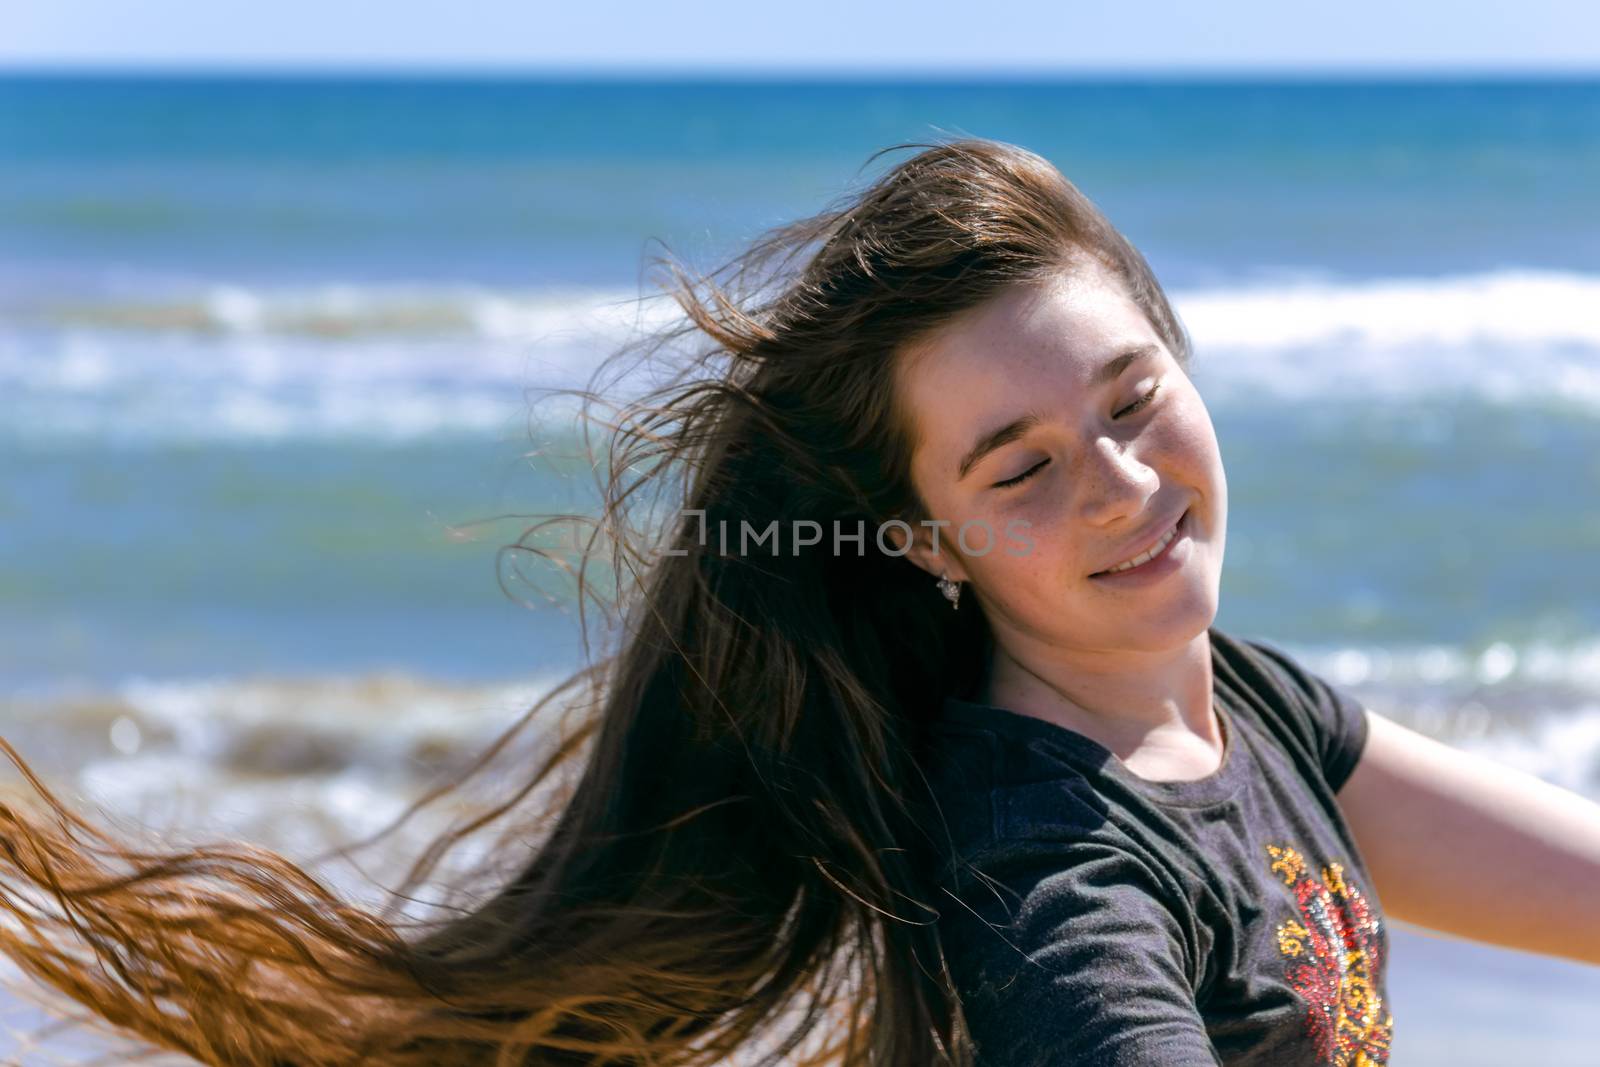 Beauty Sunshine Girl Portrait. A teenager girl with long brown hair flying in the wind smiles happily, closing her eyes and exposing the sun to her face against the backdrop of the sea.